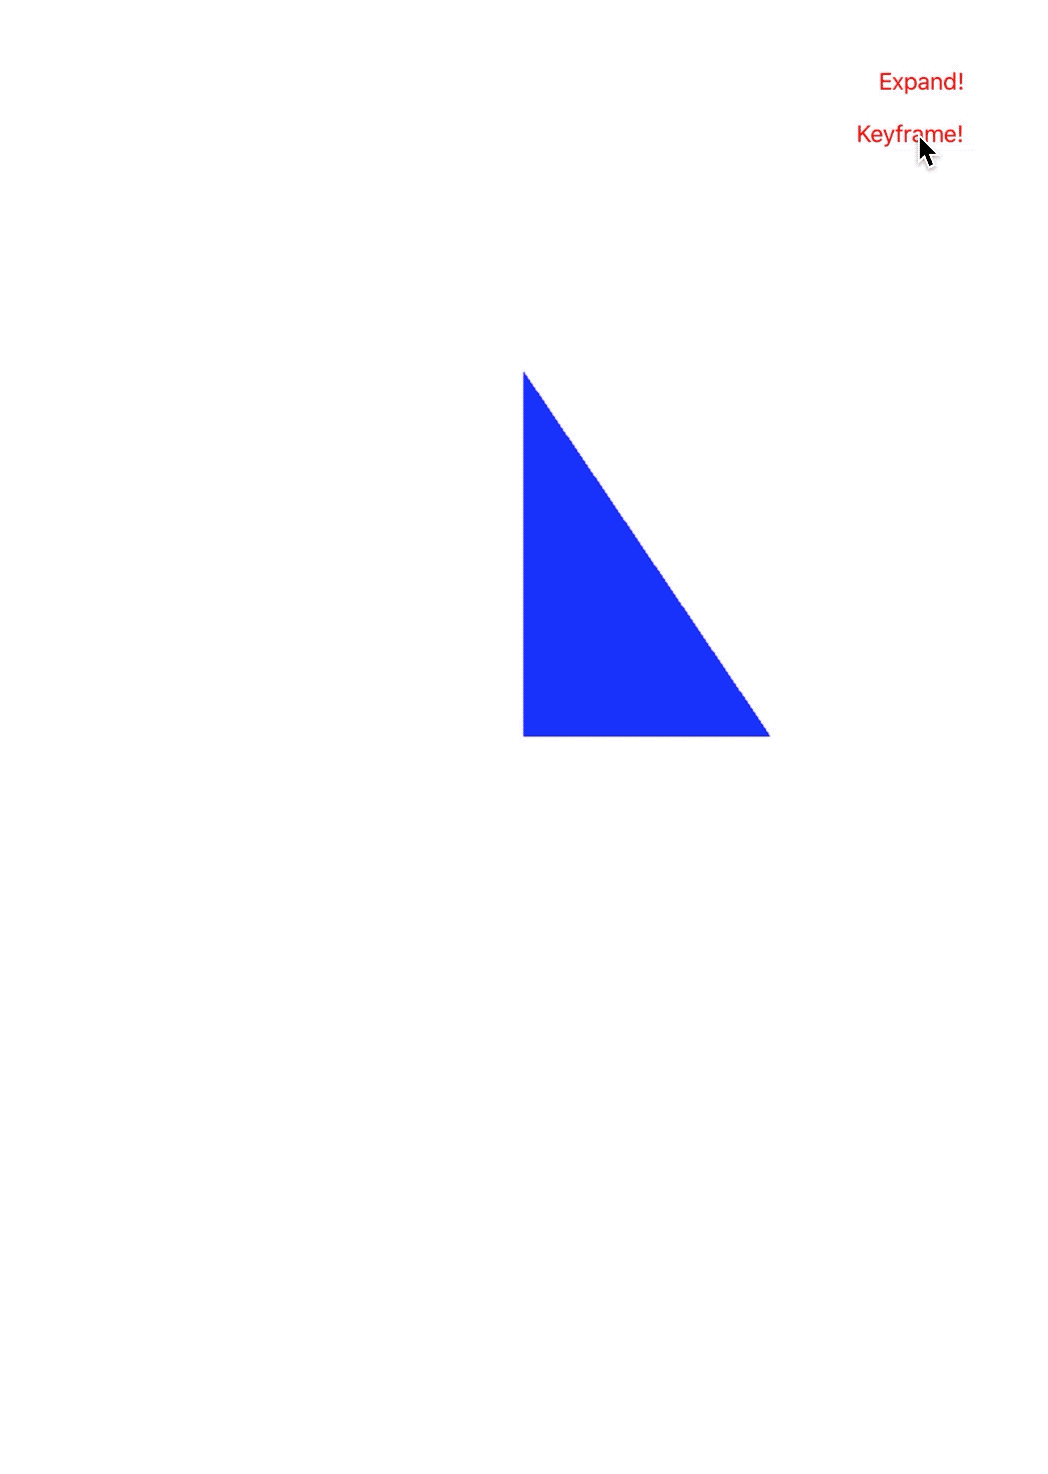 Blue triangle animating between multiple different scales with a keyframe animation